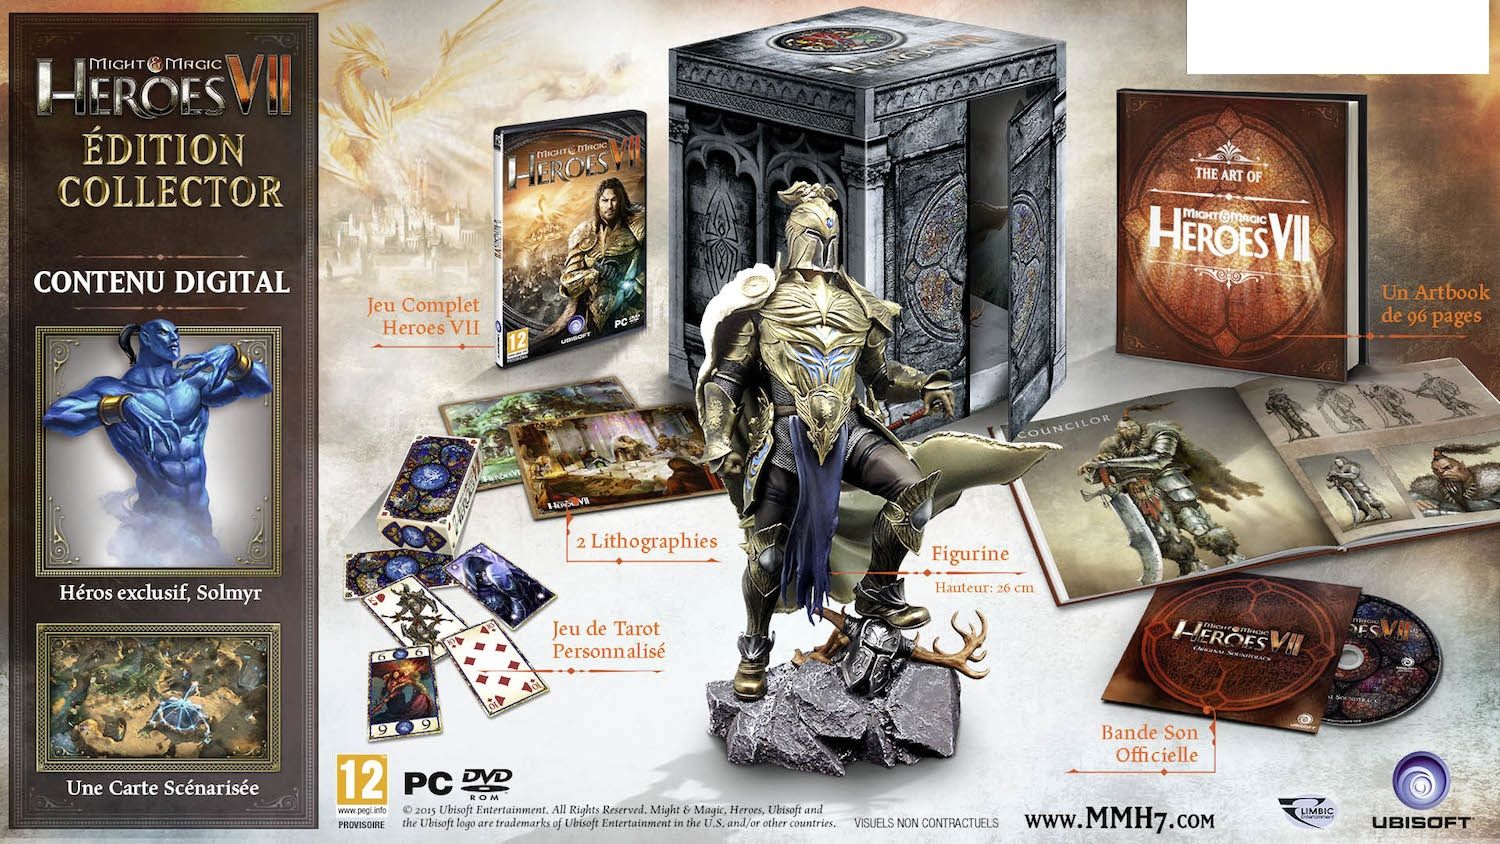 Might & Magic Heroes 7 Collector Edition